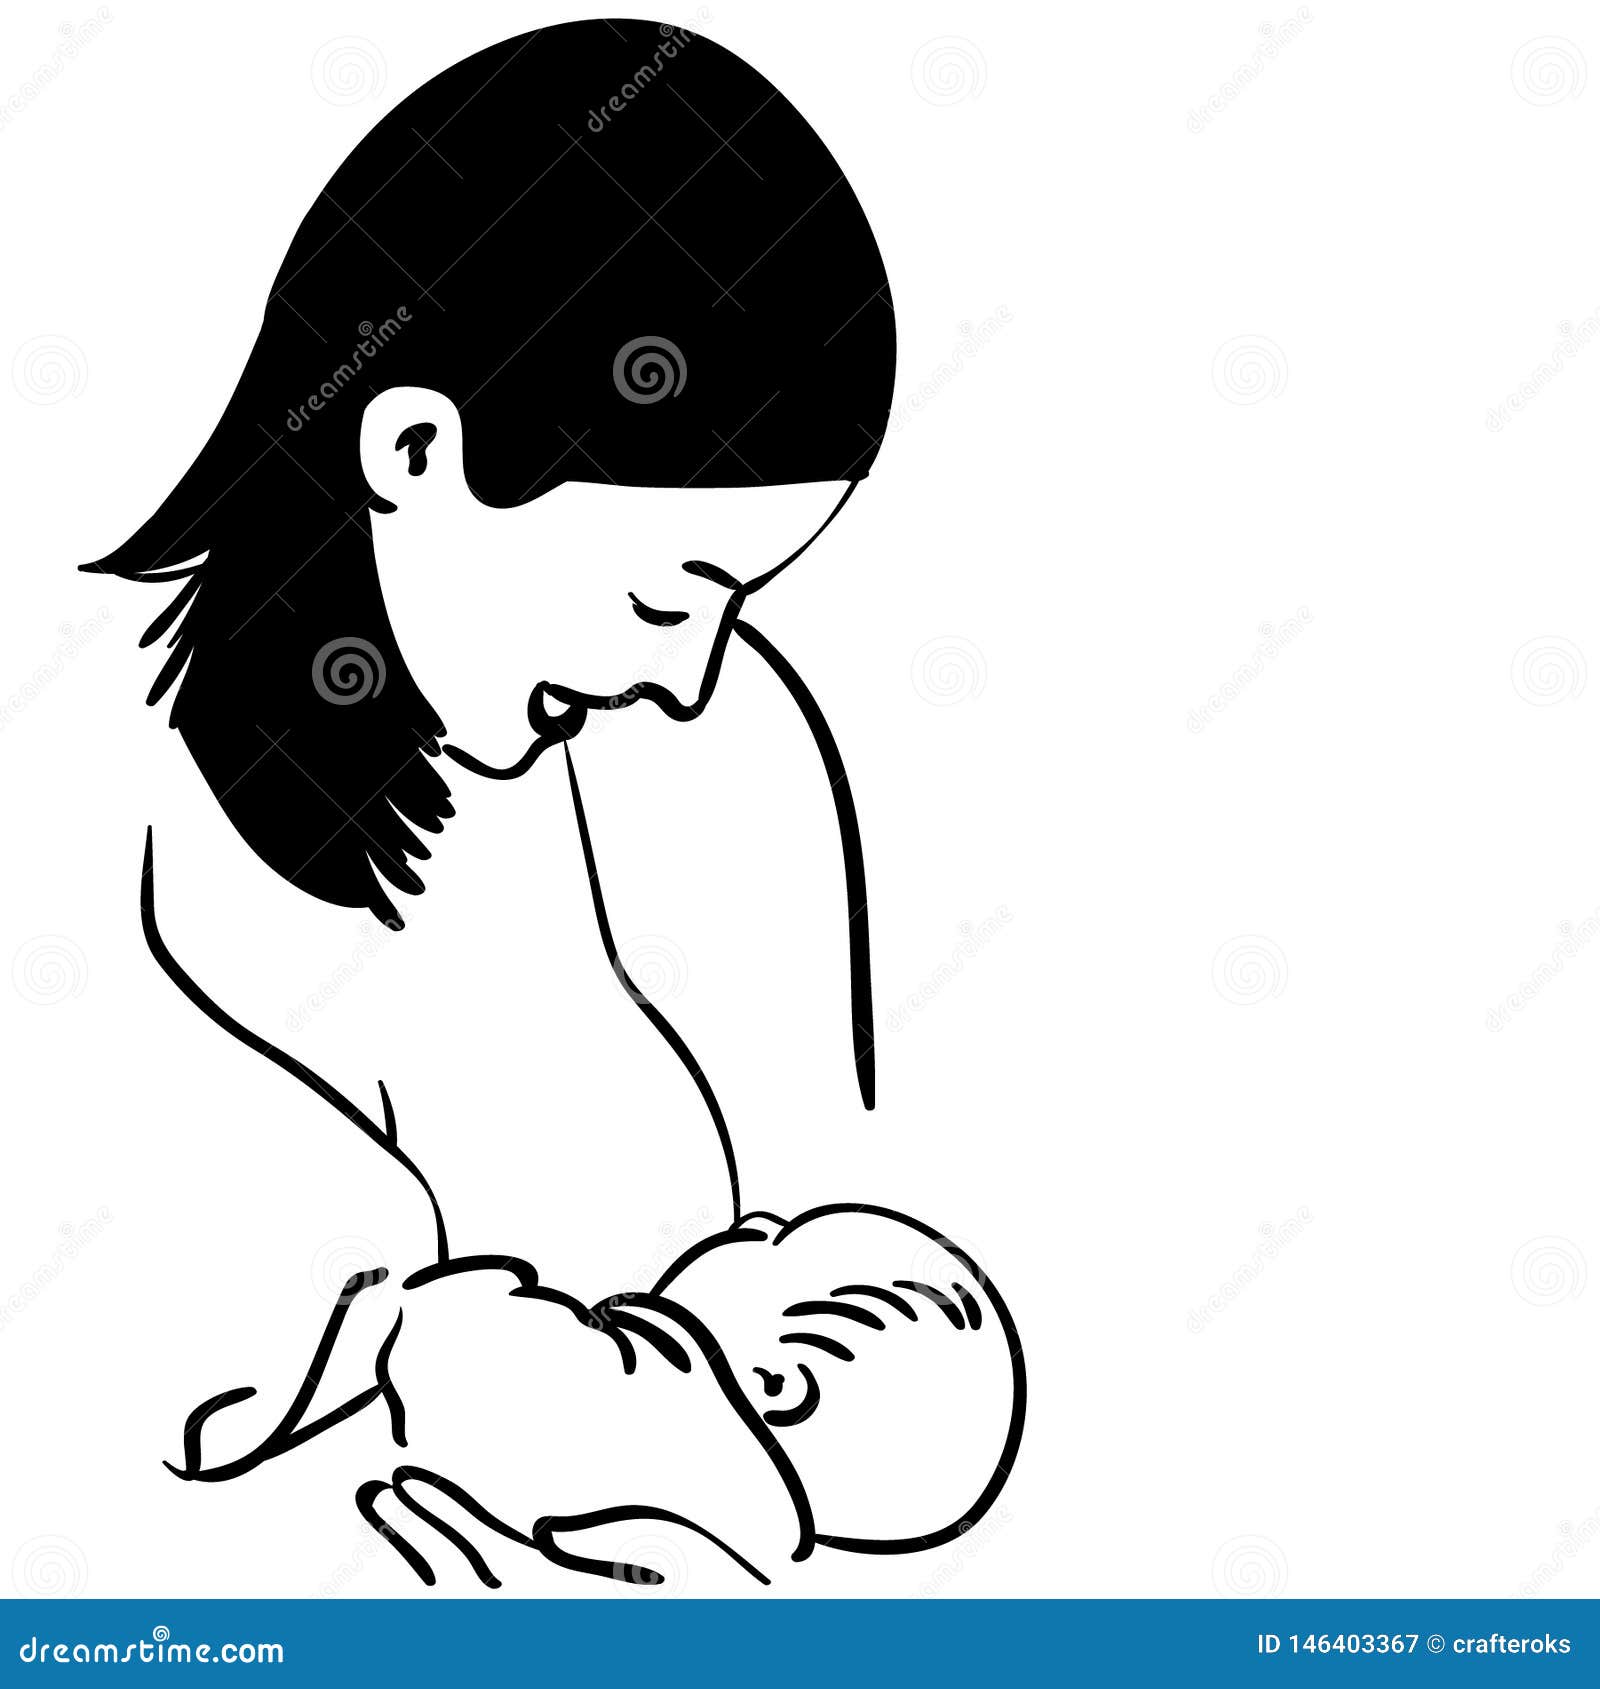 Download Breastfeeding Mother Vector Illustration By Crafteroks ...